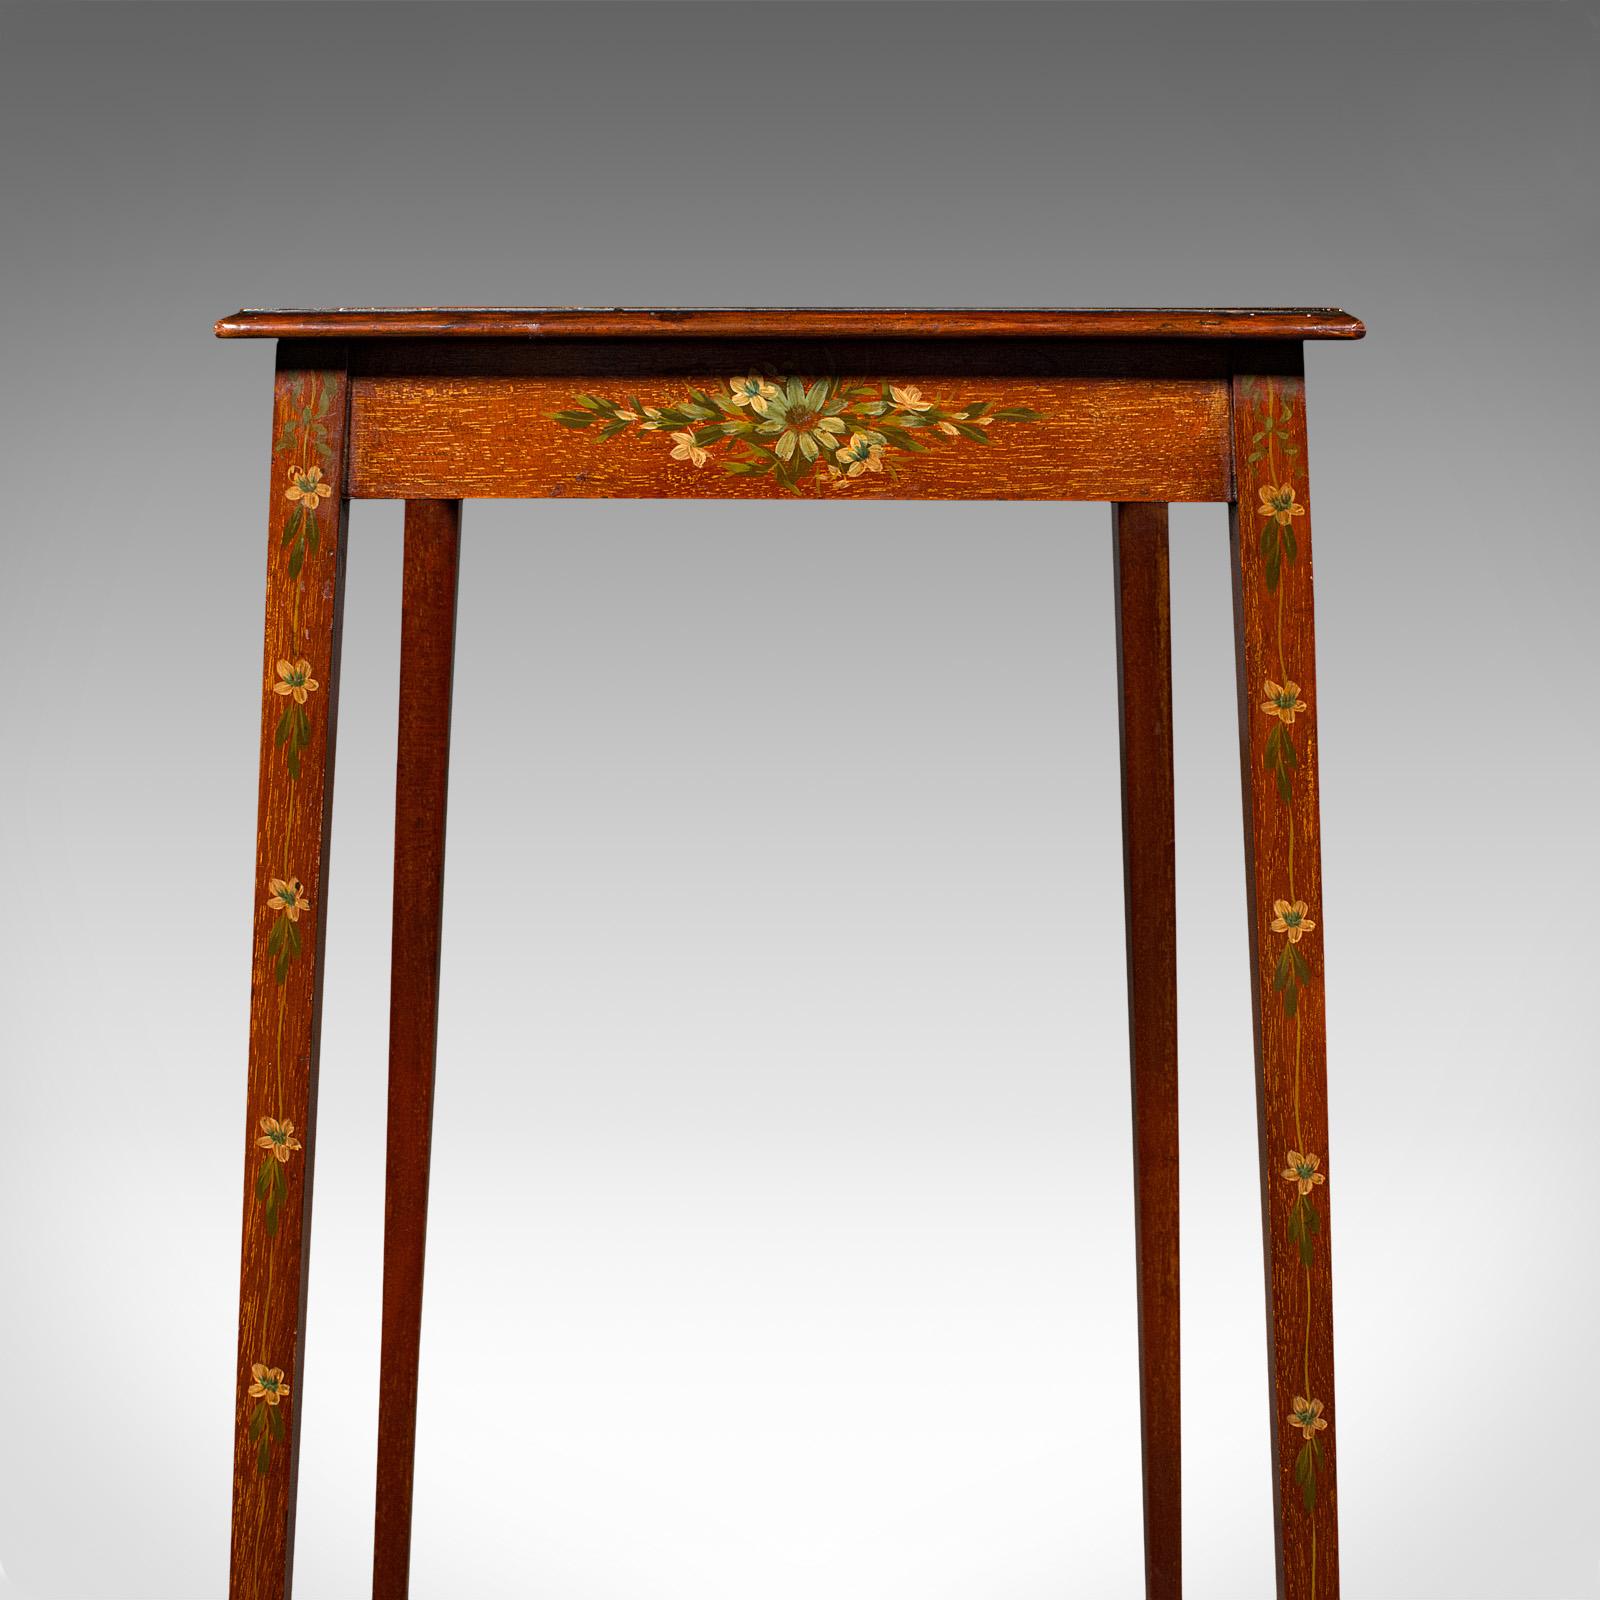 Small Antique Lamp Table, English, Occasional, Hand Painted Decor, Regency, 1820 For Sale 3